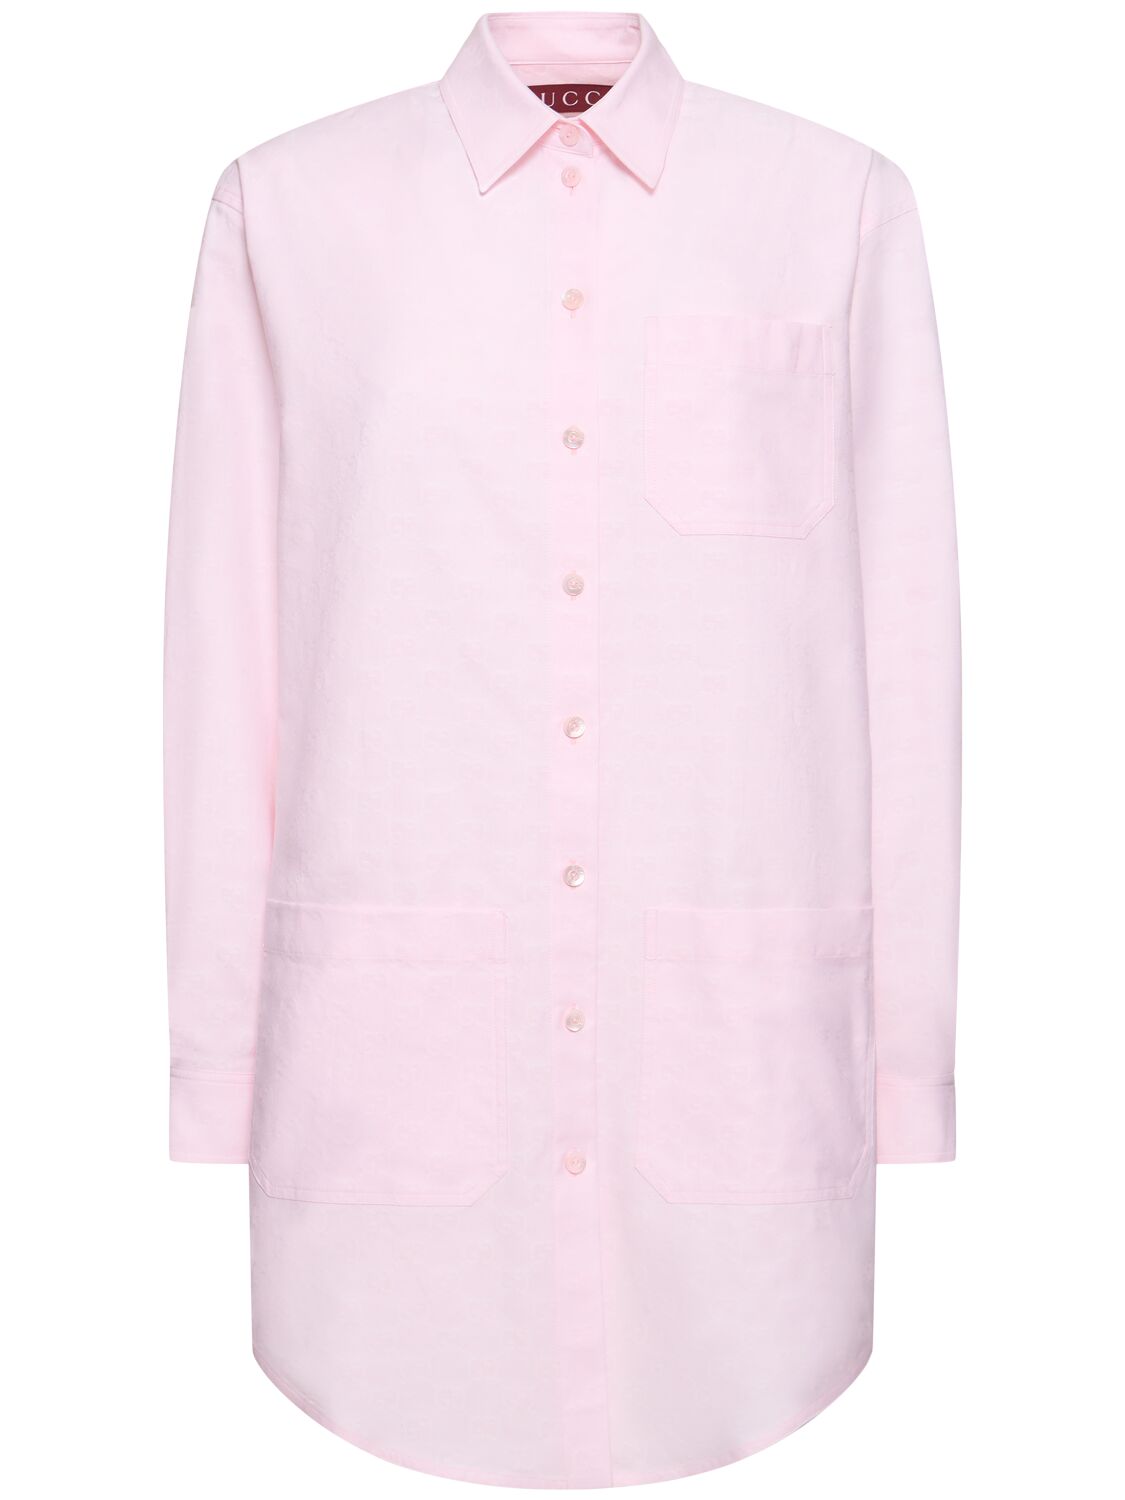 Gucci Gg Supreme Cotton Shirt In Pink Rose